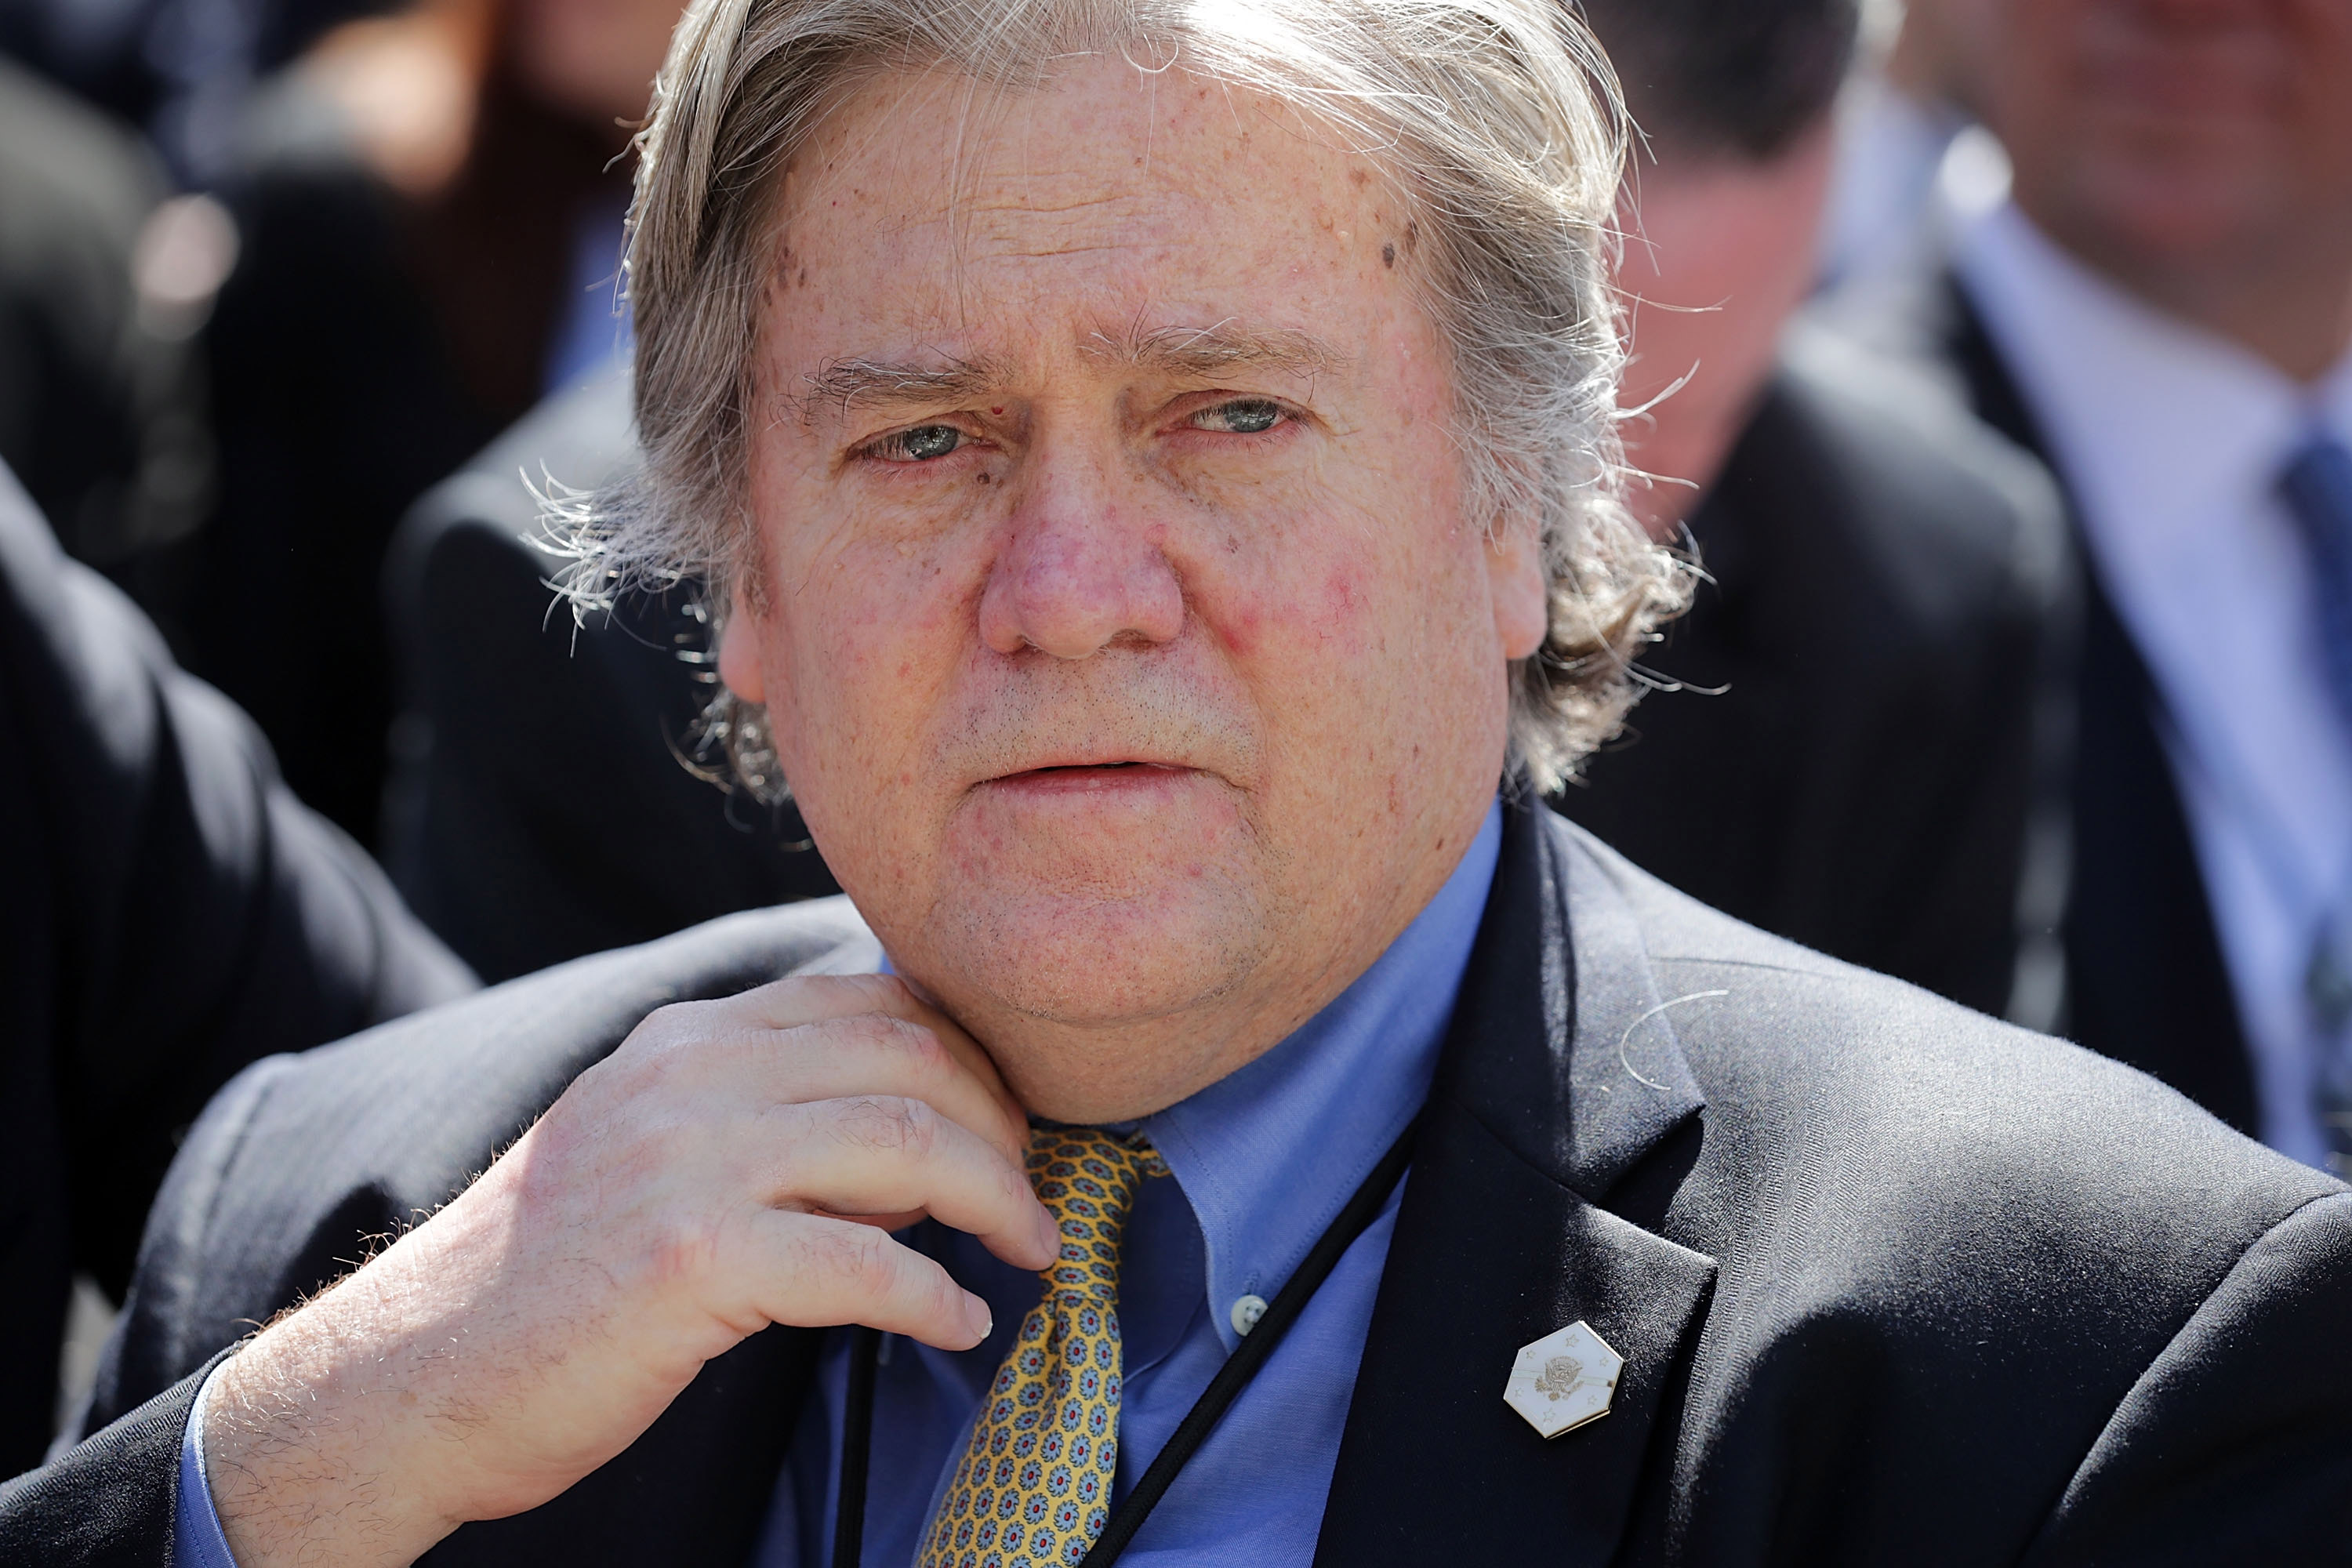 Former White House Chief Strategist Steve Bannon attends a ceremony in the Rose Garden at the White House on April 10, 2017 in Washington, DC. 